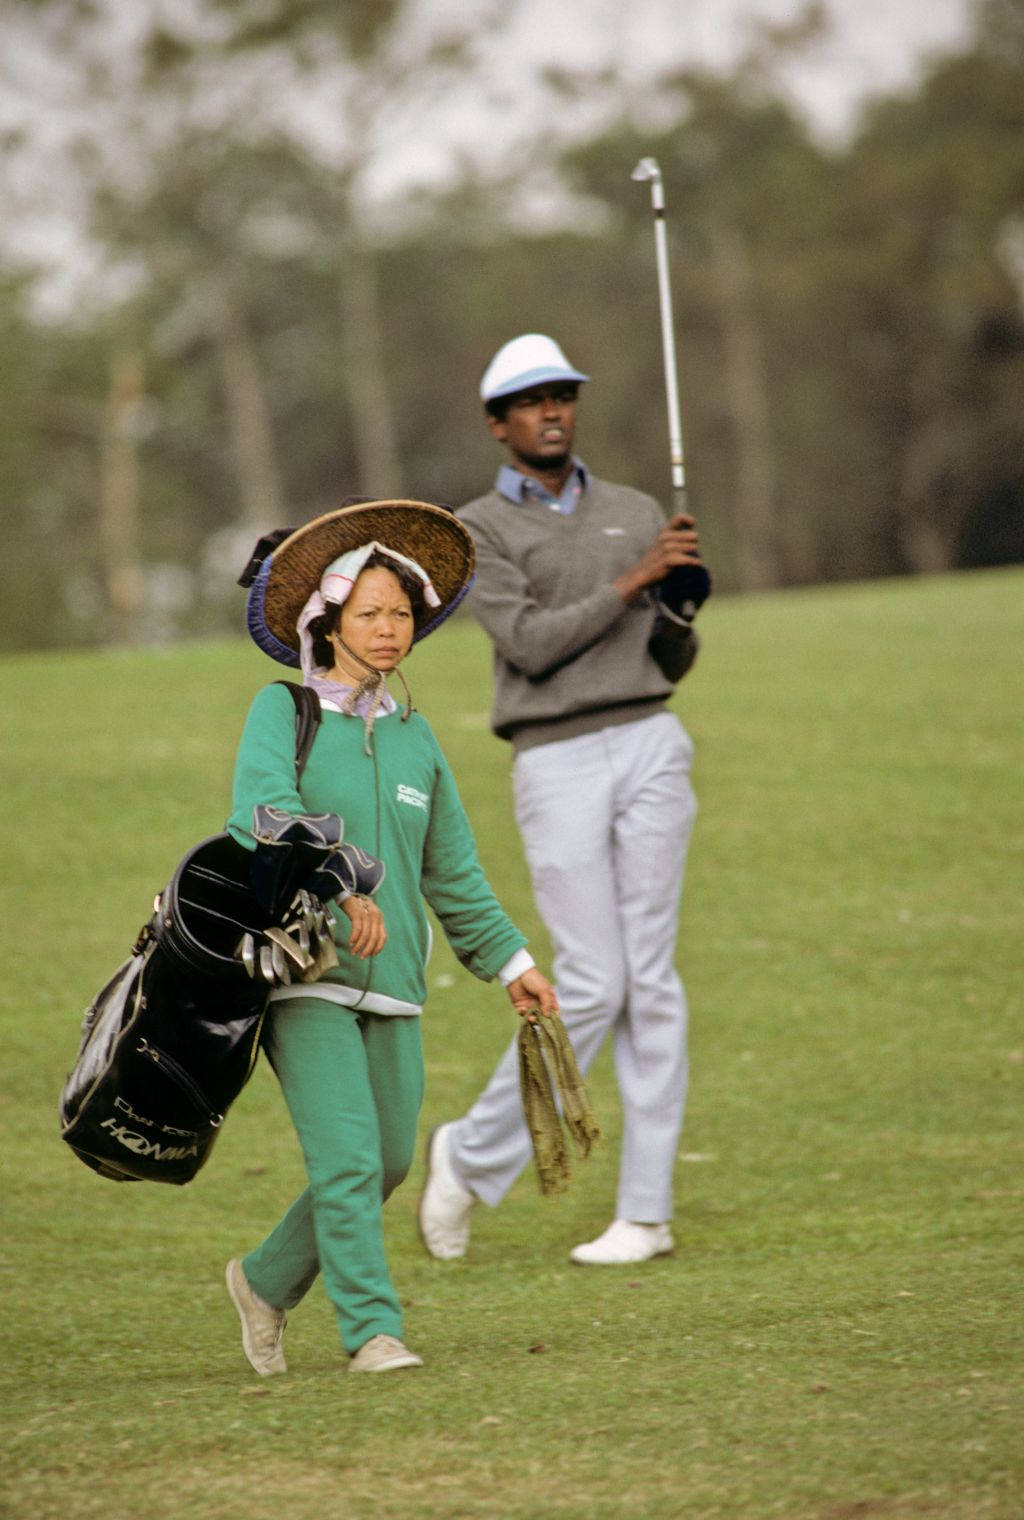 Vijay Singh in his youth during a golf practice Wallpaper